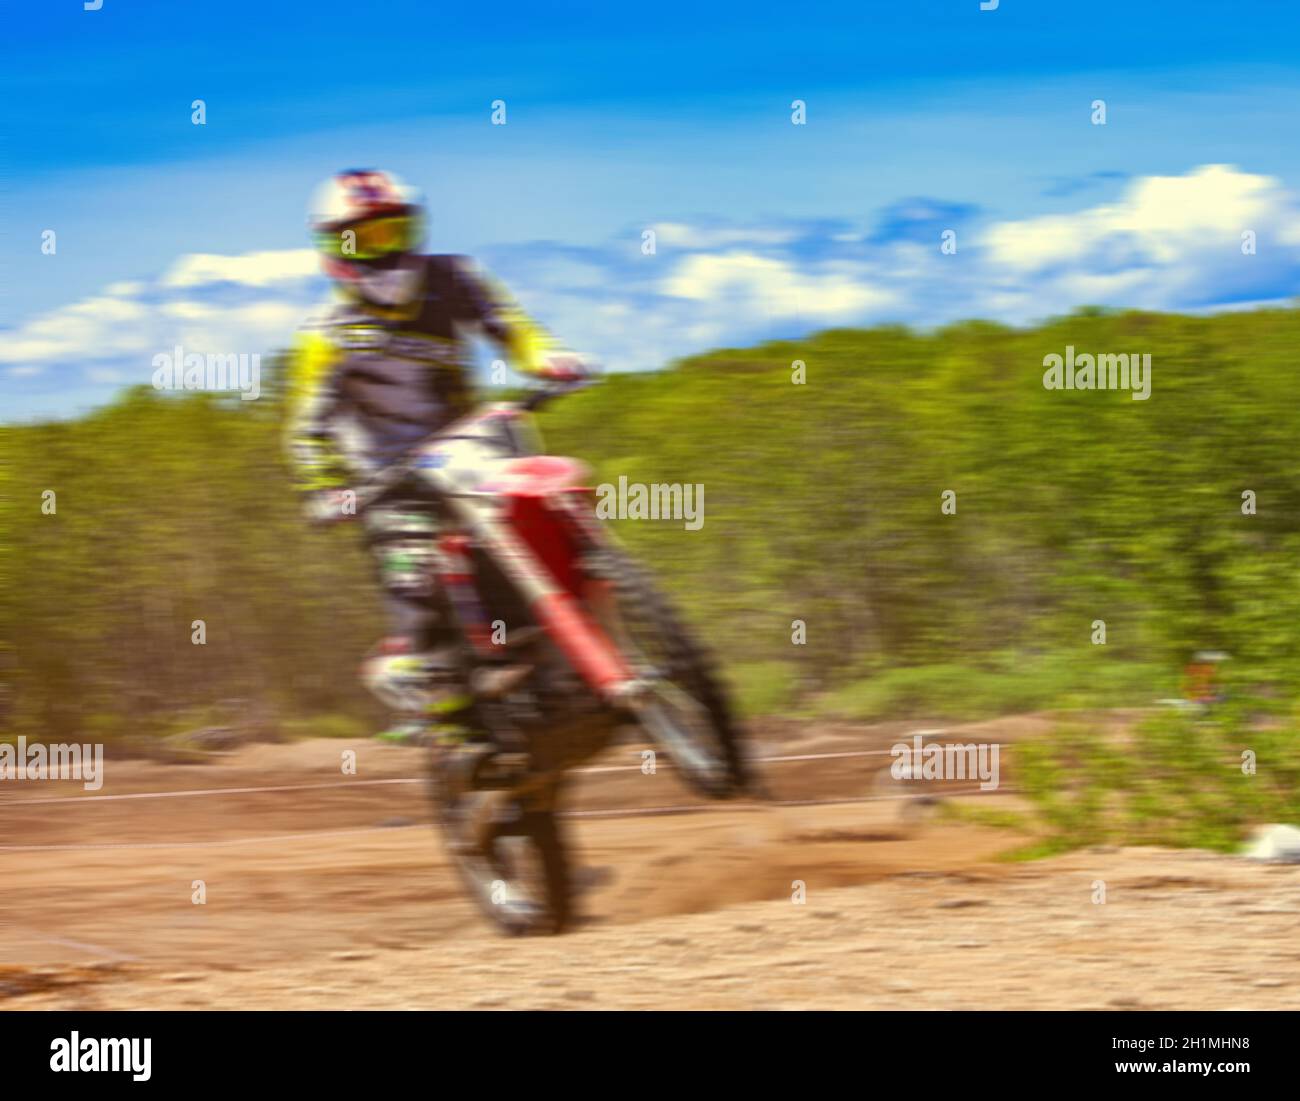 Kamchatka, Russia- 29 June 2019: Motocross riders practice tricks on their dirt bikes on a sunny day in Kamchatka Stock Photo